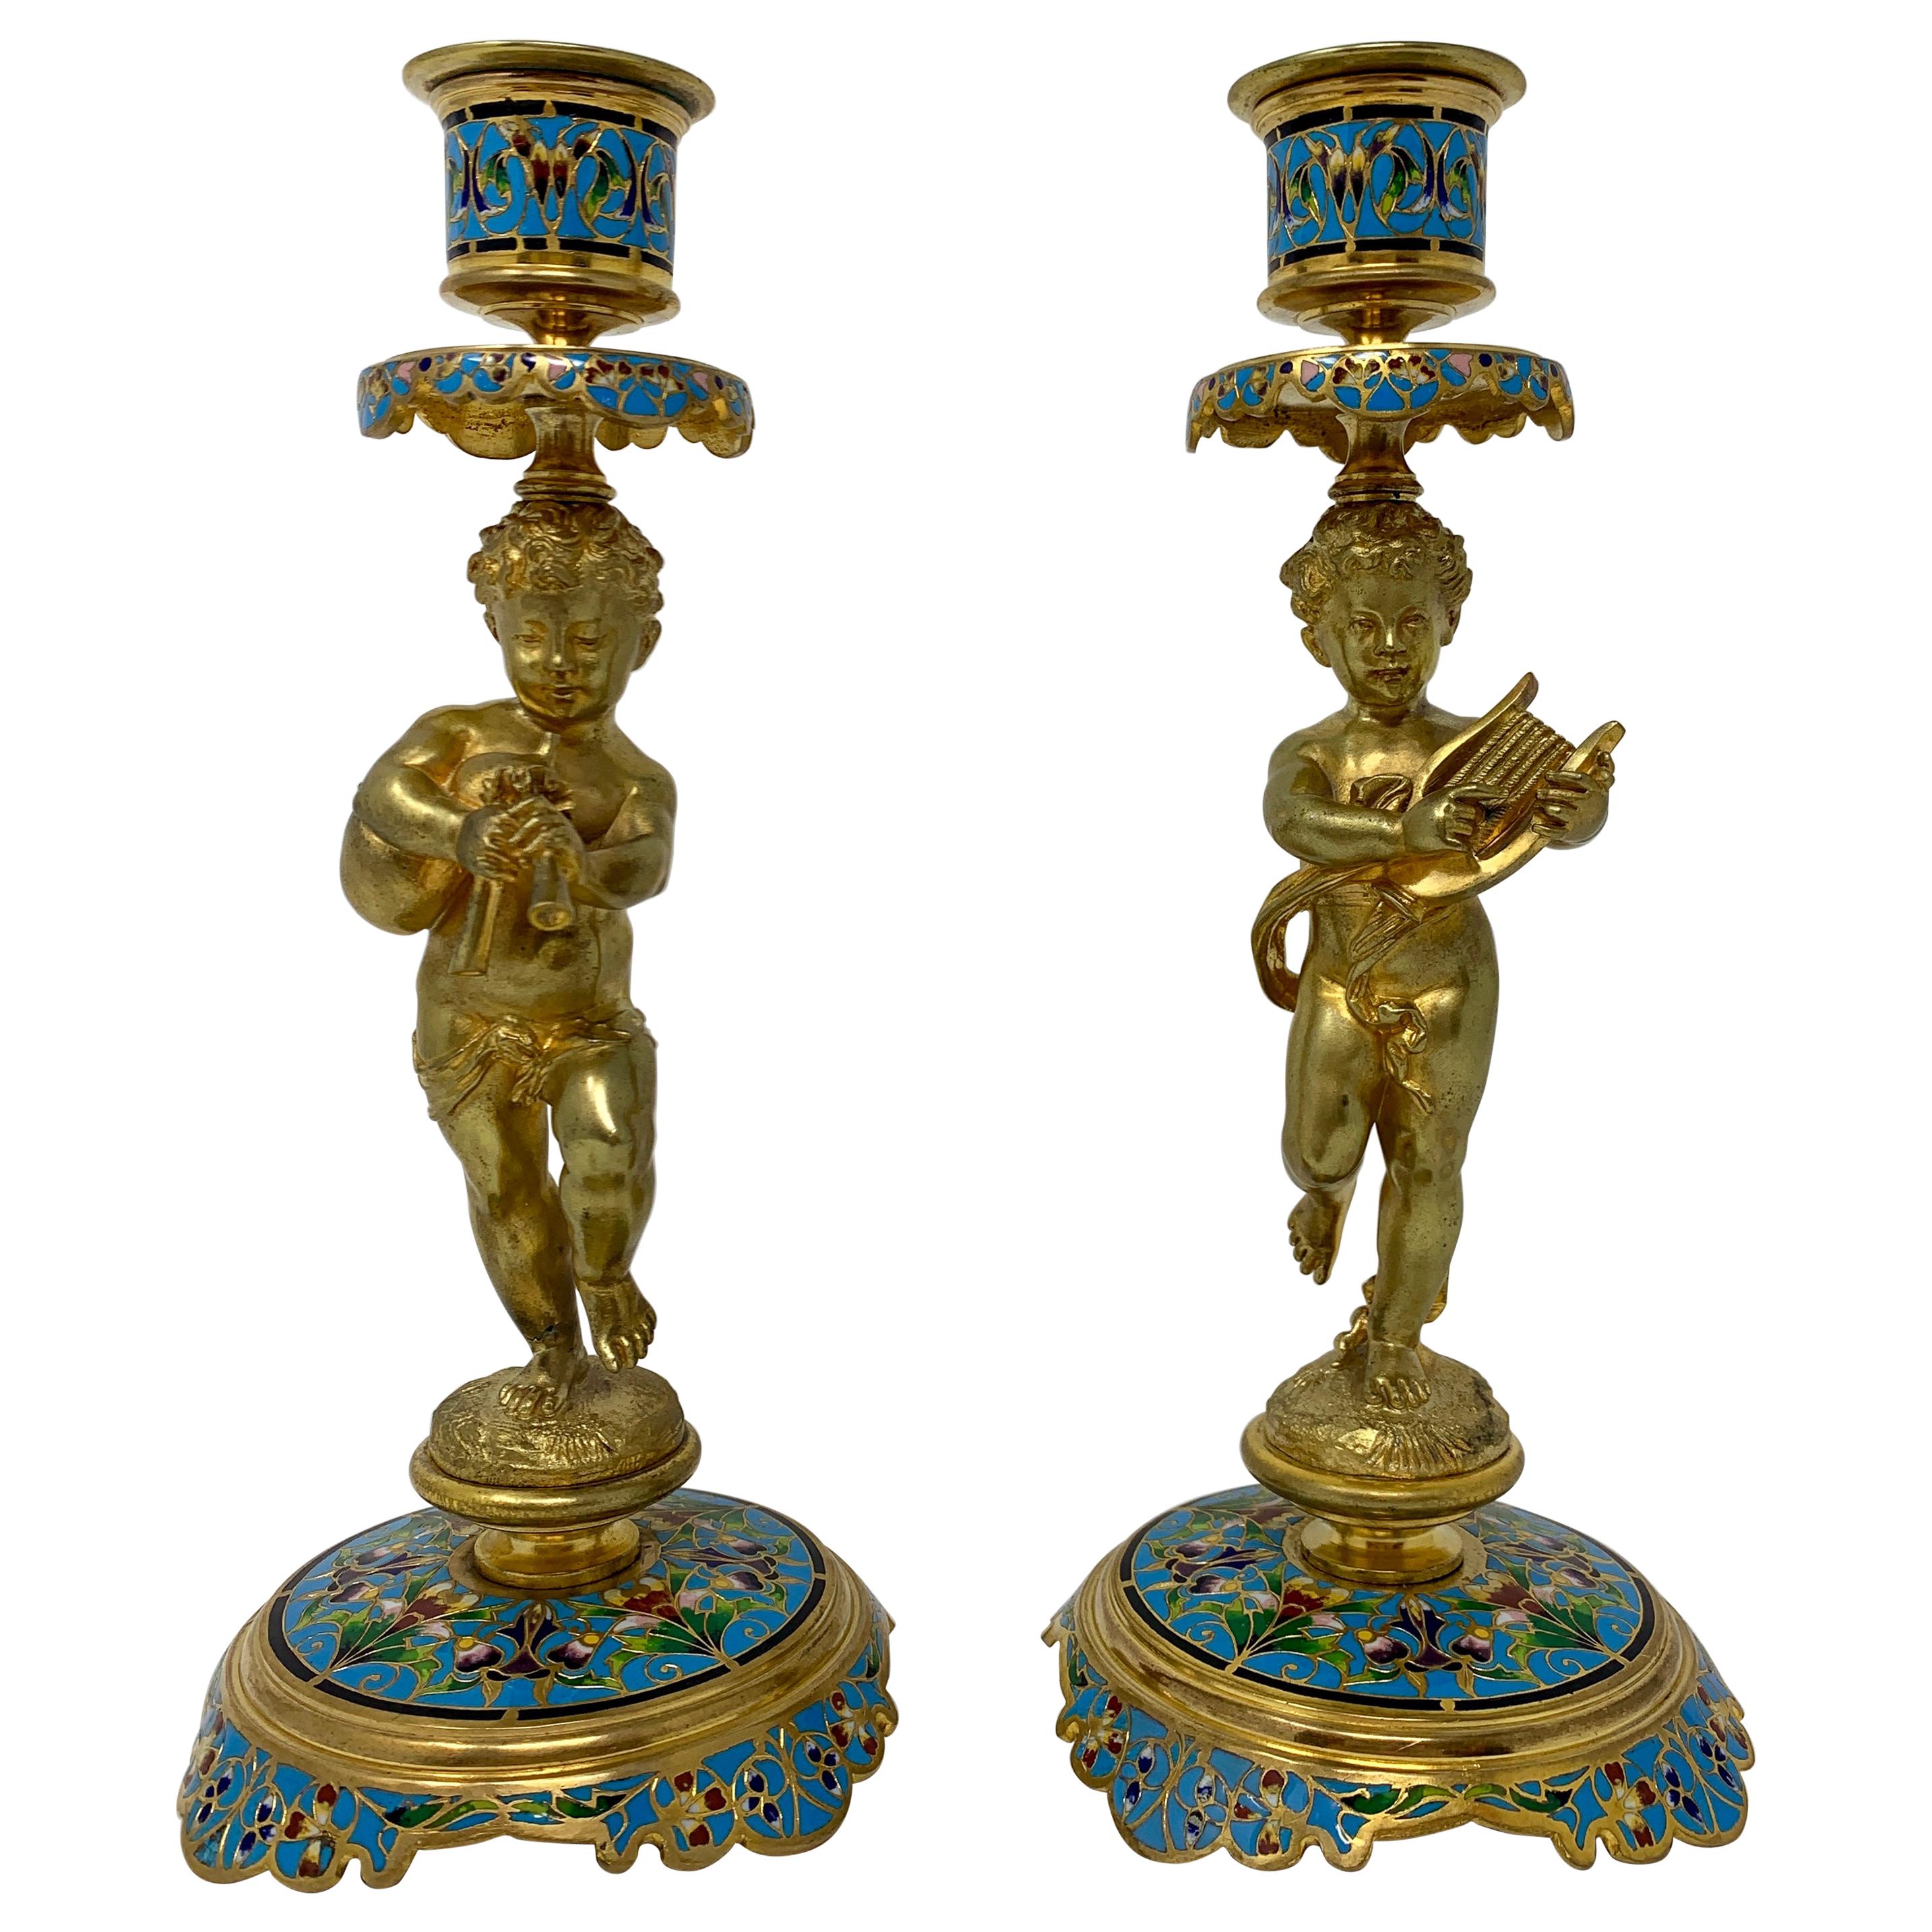 Pair of Antique French Cloisonné and Gold Bronze Candlesticks